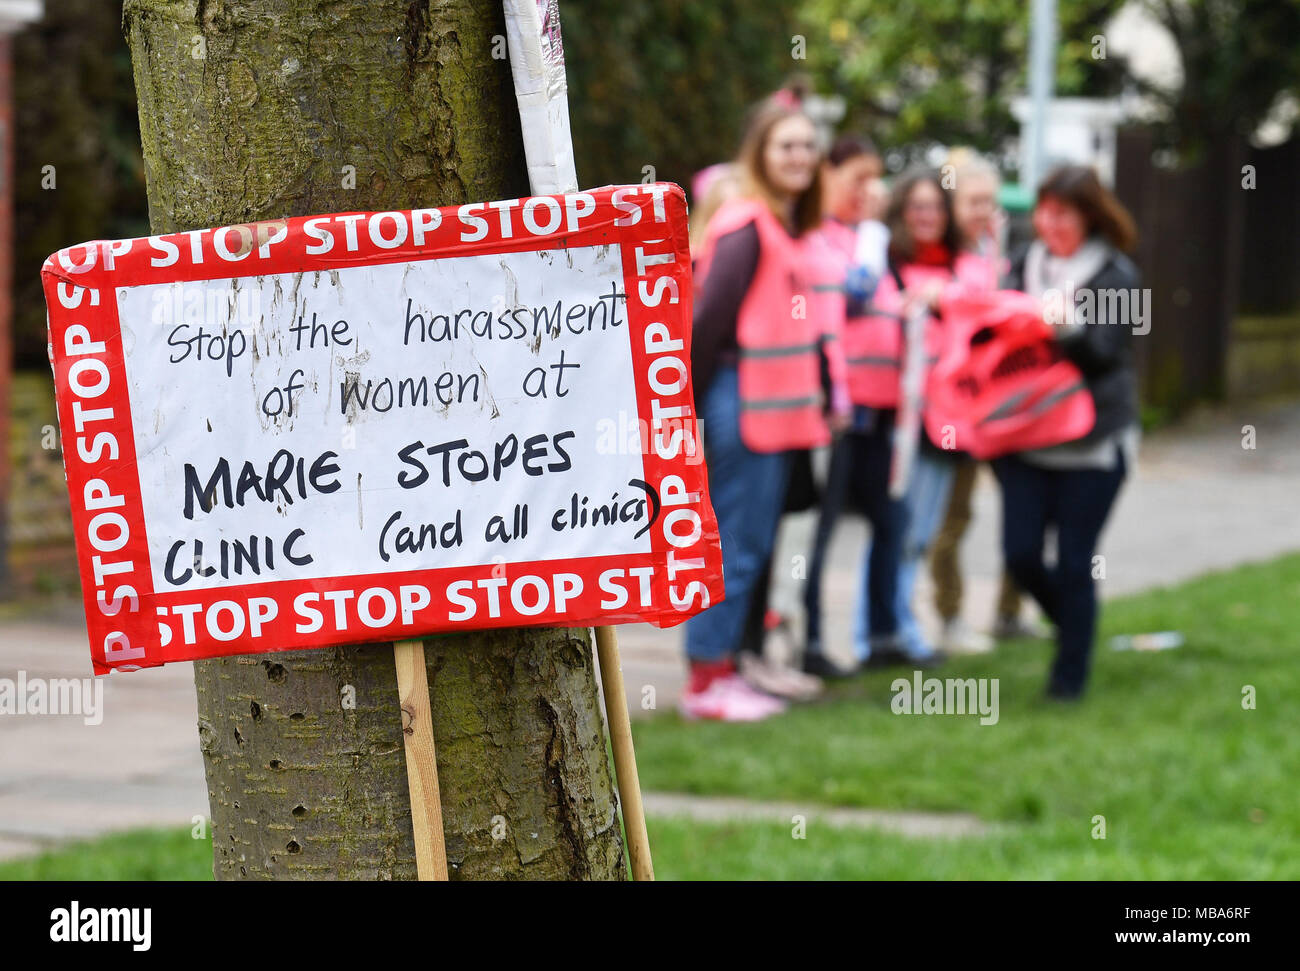 EMBARGOED TO 0001 TUESDAY APRIL 10 Pro-choice demonstrators gather outside the Marie Stopes clinic on Mattock Lane, ahead of a vote by Ealing Council on whether to implement a safe zone outside the west London abortion clinic to protect women from being intimidated. Stock Photo